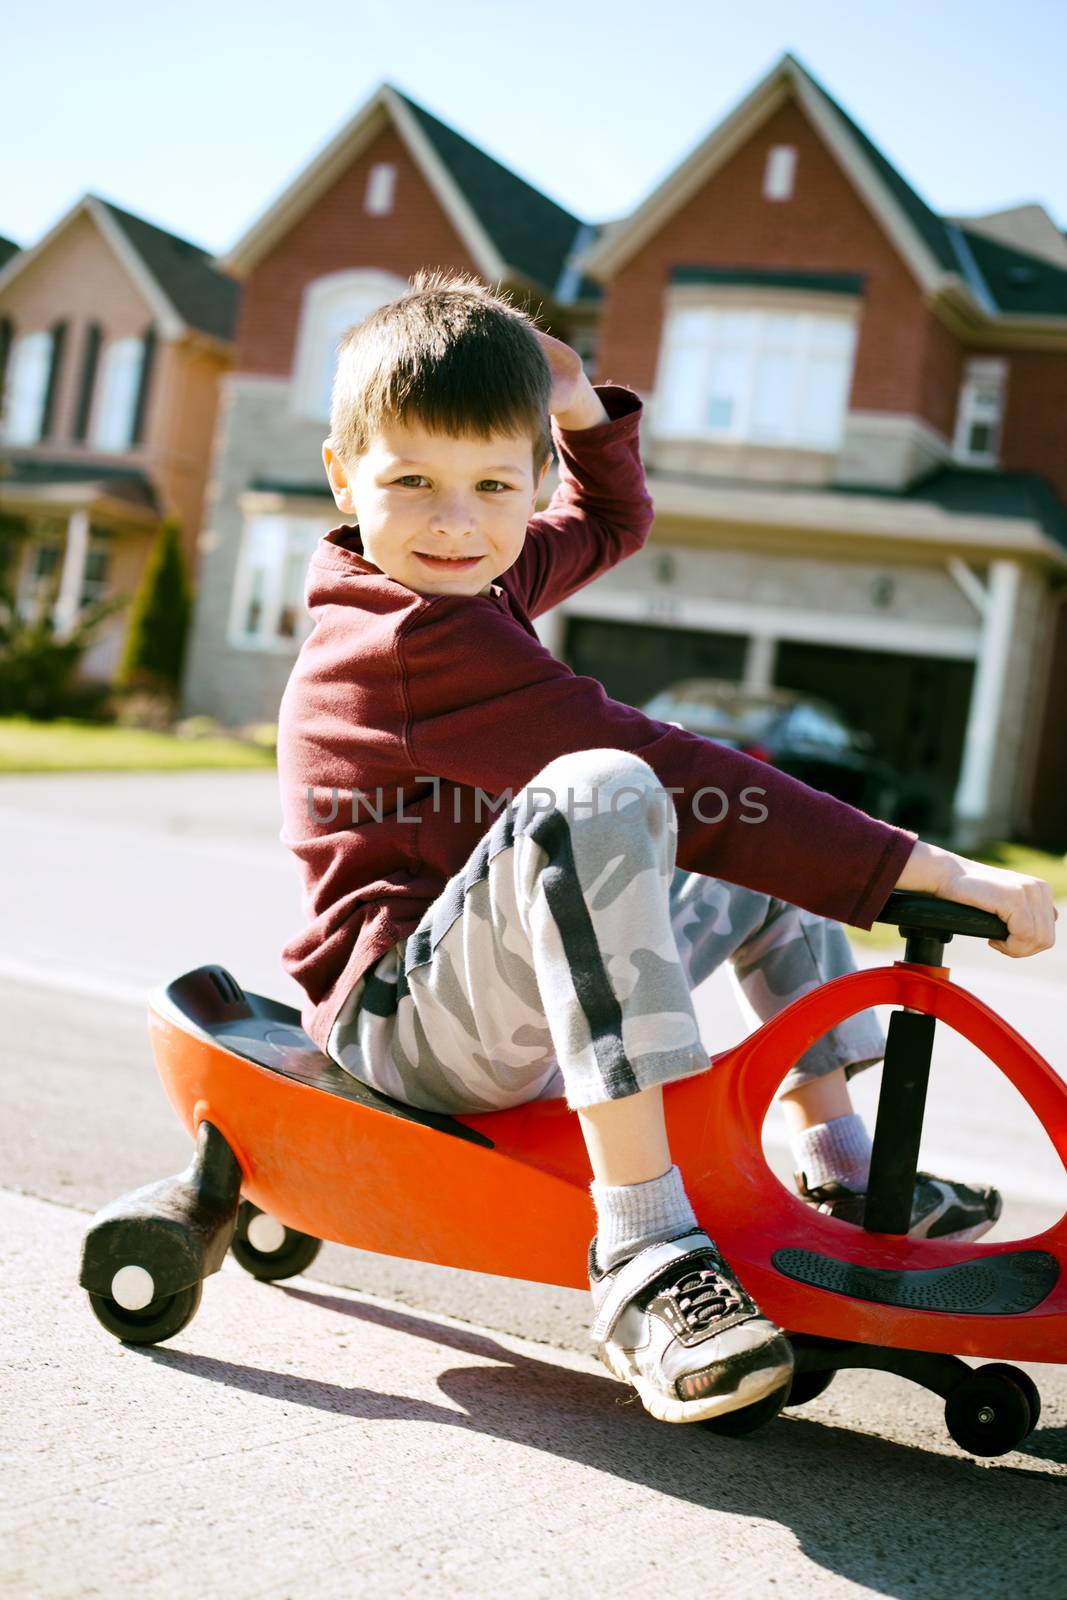 small boy is having fun riding his toy on the street